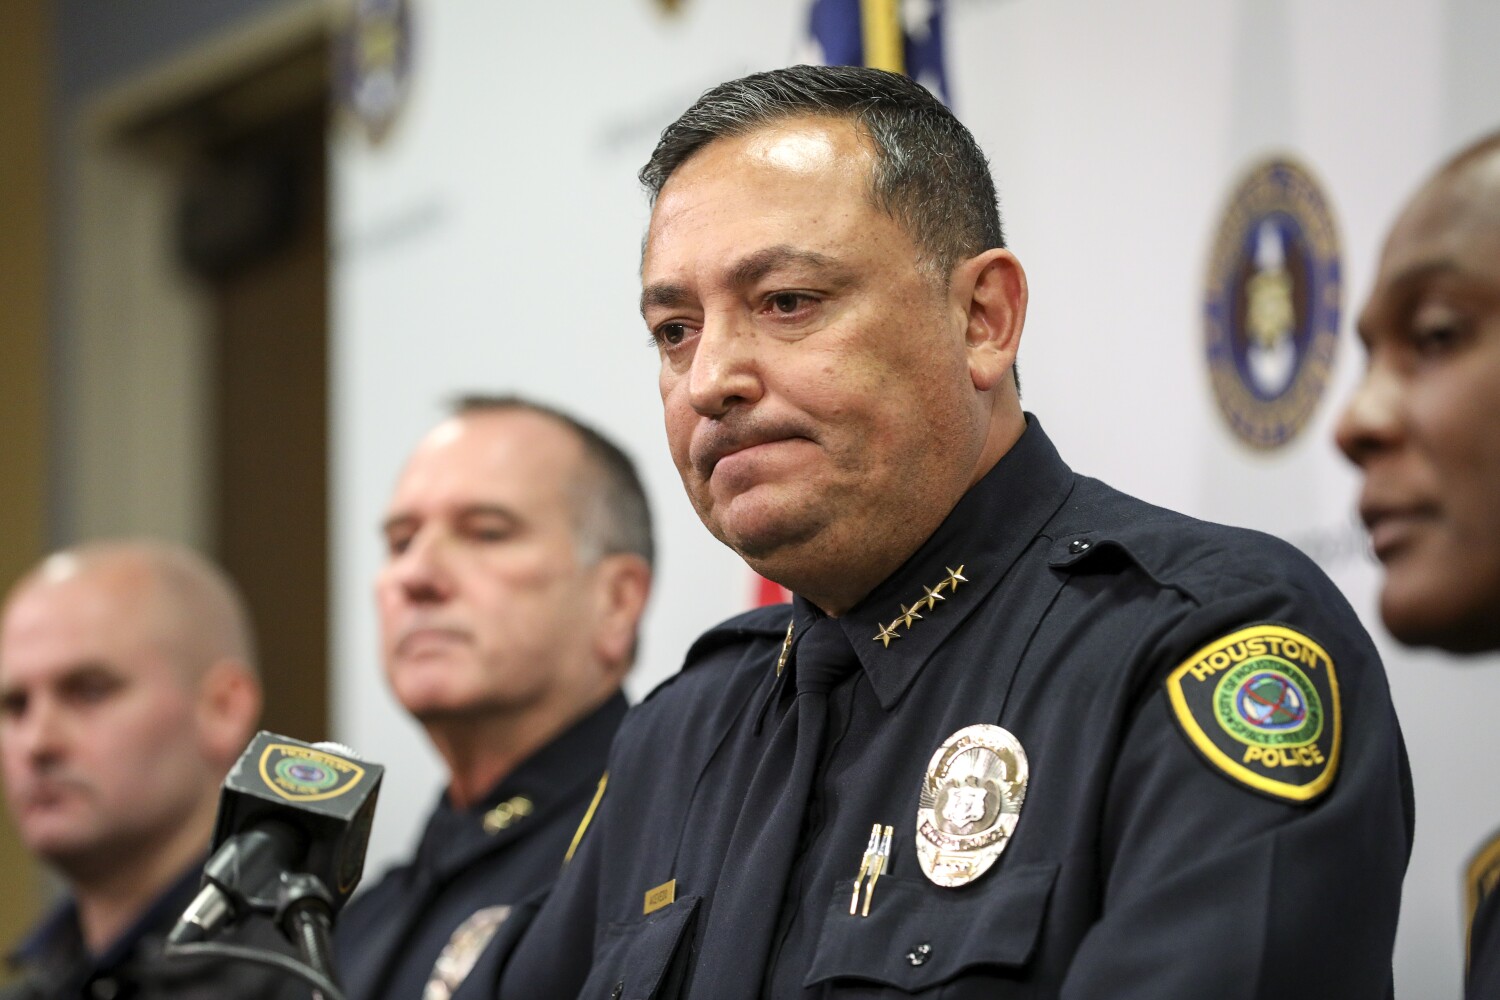 After weeks of speculation, Art Acevedo says he will not enter L.A. County sheriff's race